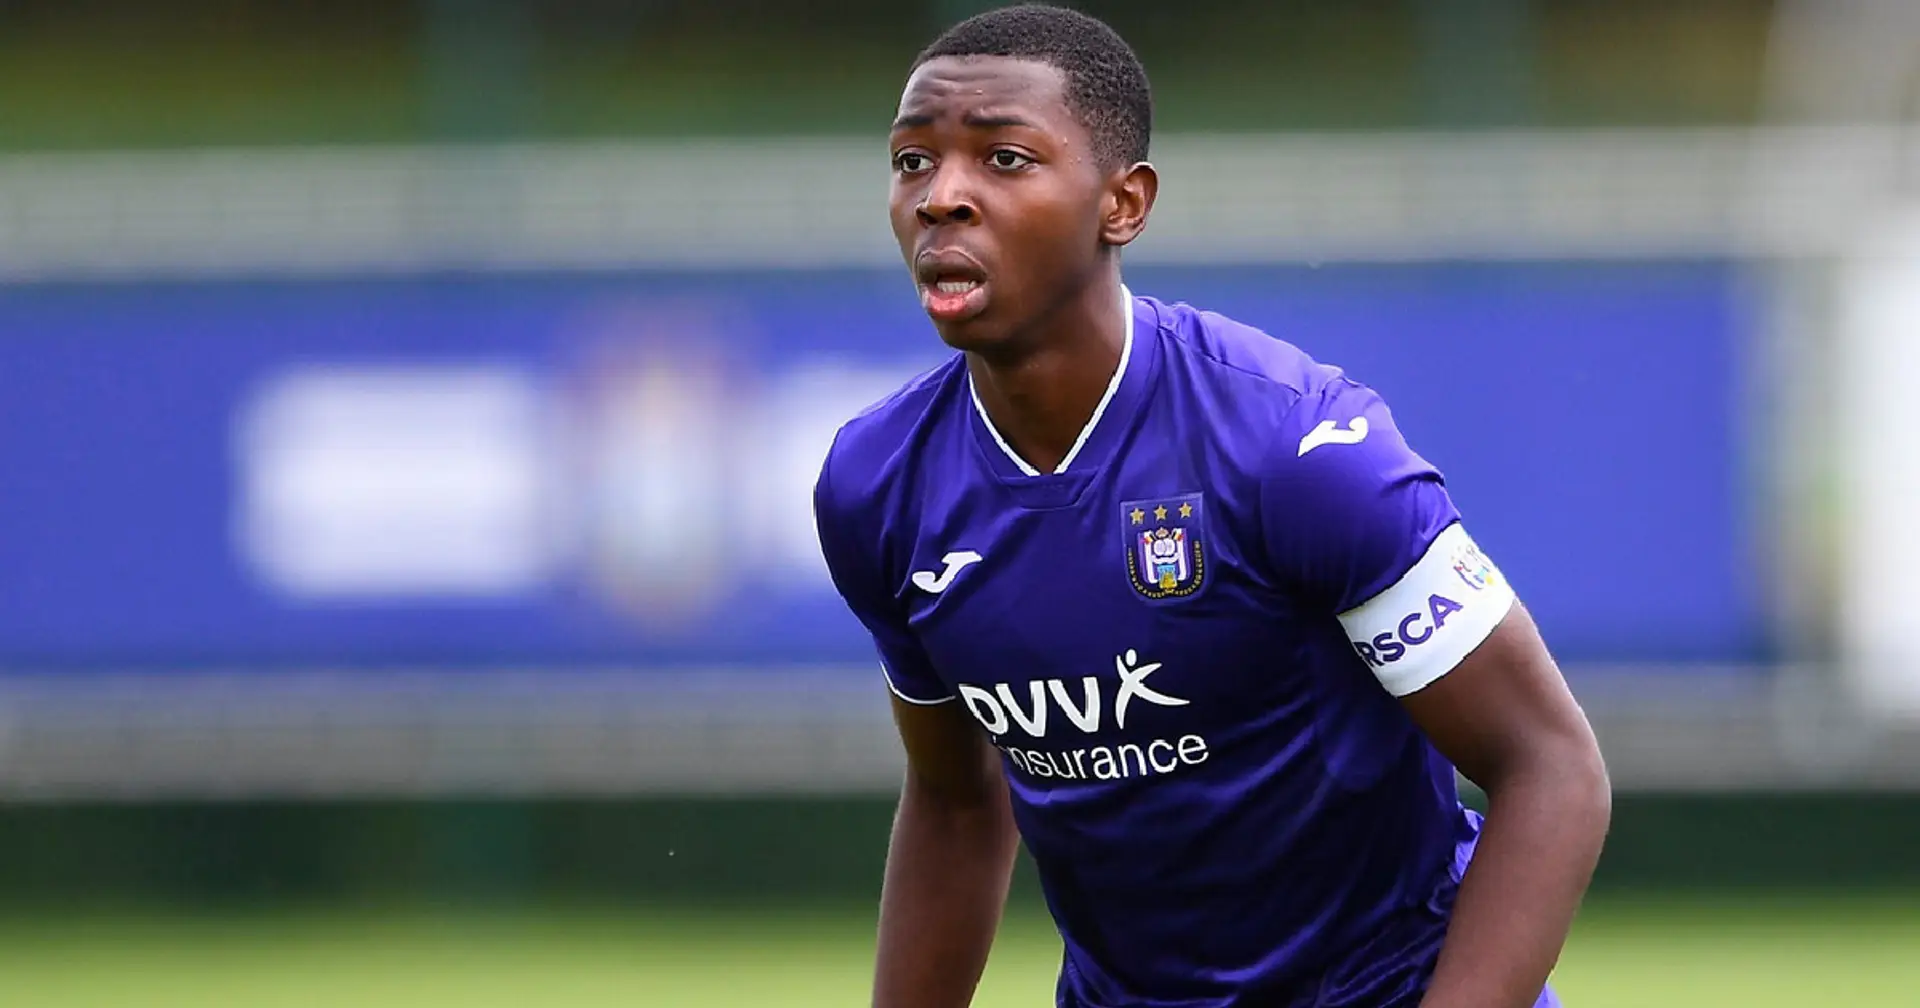 'I prefer Liverpool. They really dominate everything': Young Anderlecht defender reveals wish to move to Anfield